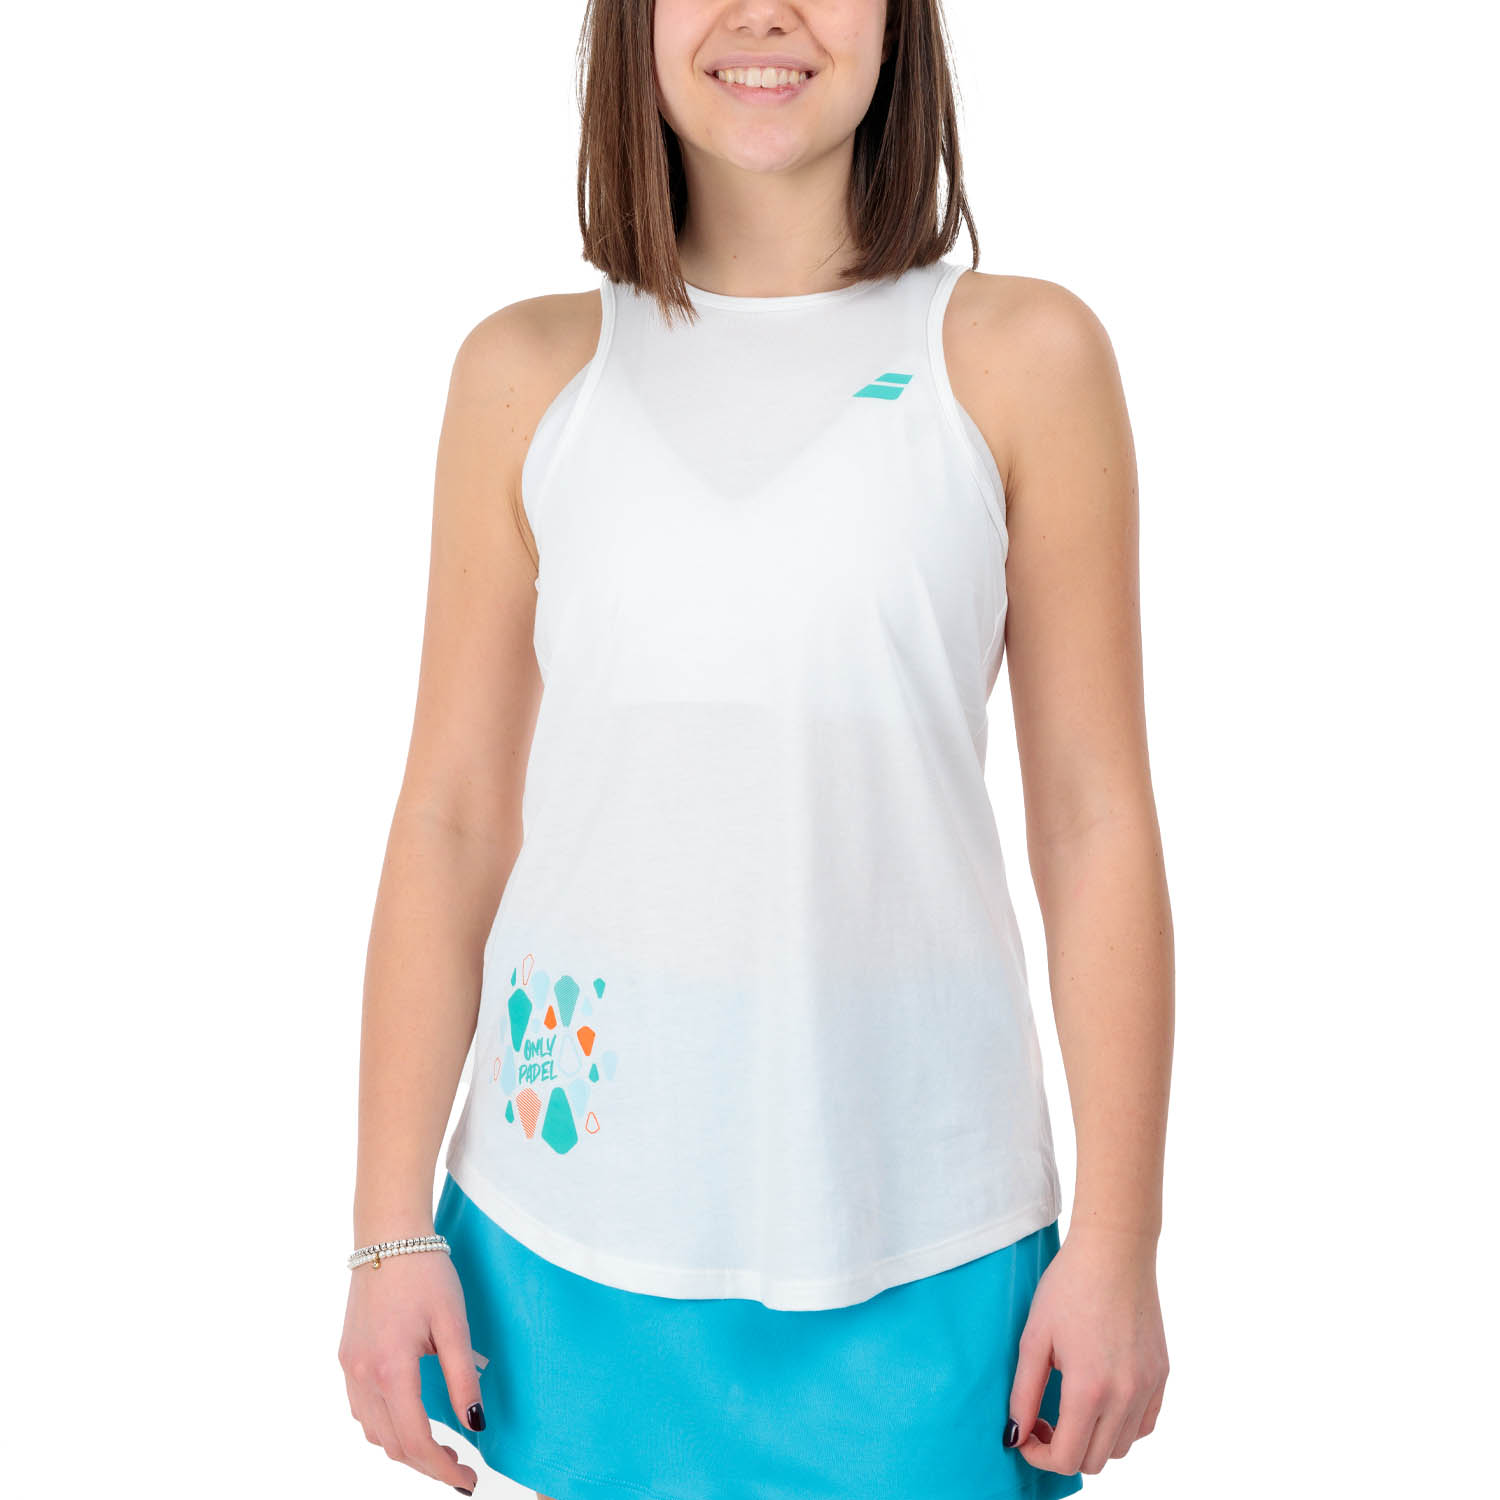 Babolat Graphic Top - White